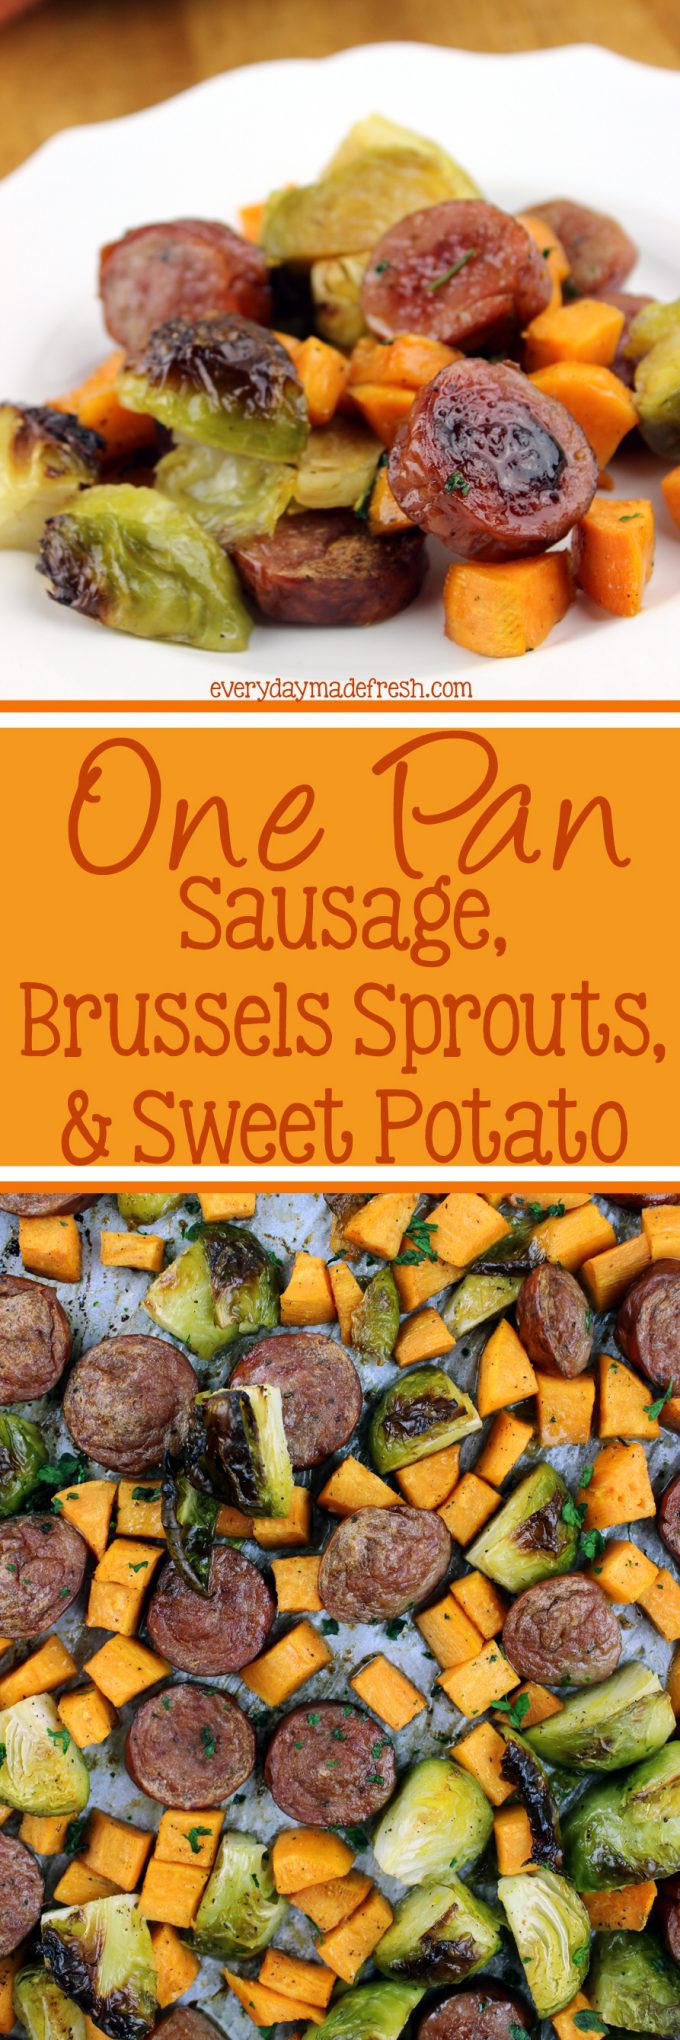 Nothing beats this quick and easy One Pan Sausage, Brussels Sprouts, & Sweet Potato. This tasty recipe leaves you with virtually no clean-up; perfect for any night! | EverydayMadeFresh.com